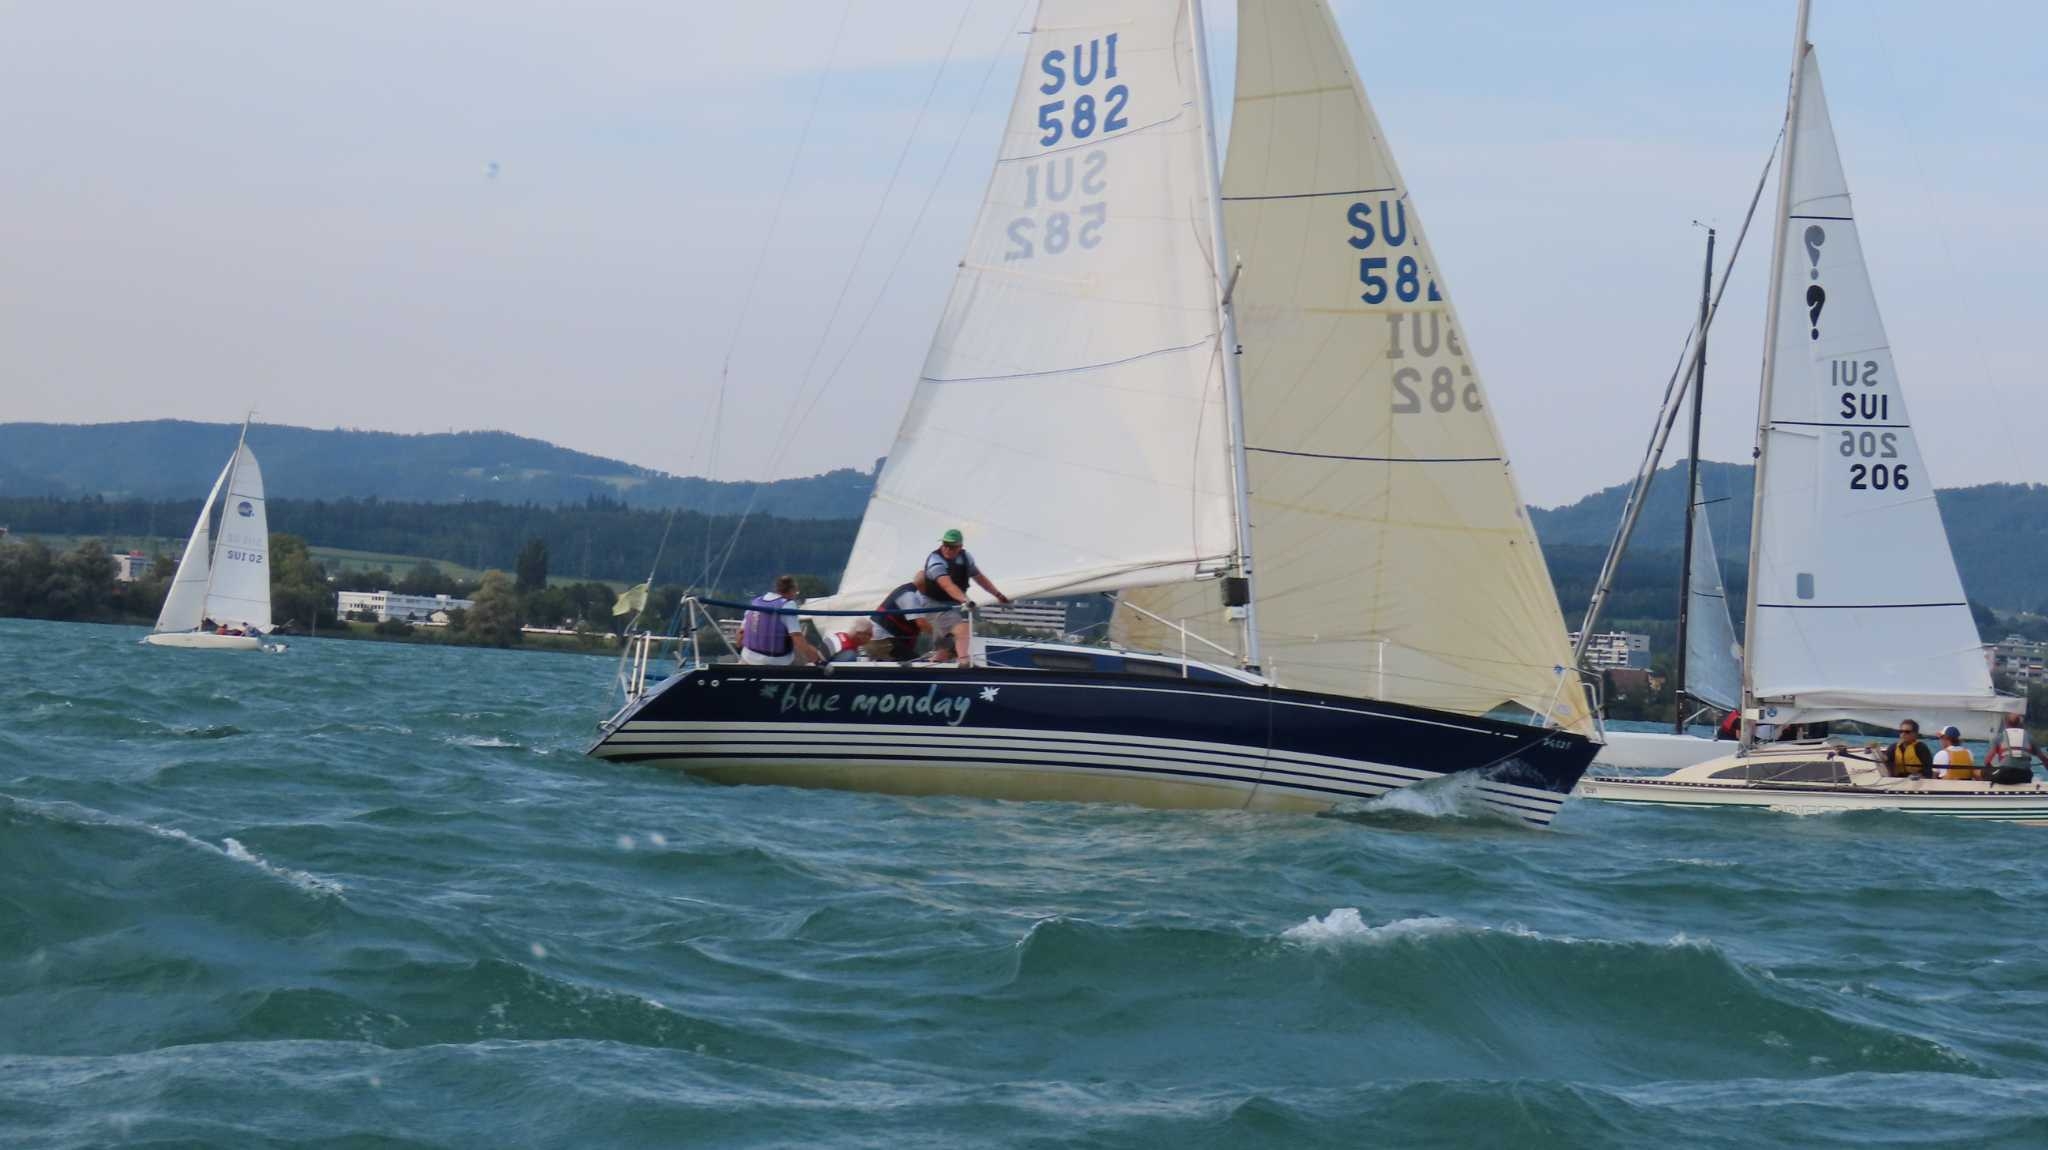  Weiss Yacht Cup  YC Zug  Day 2